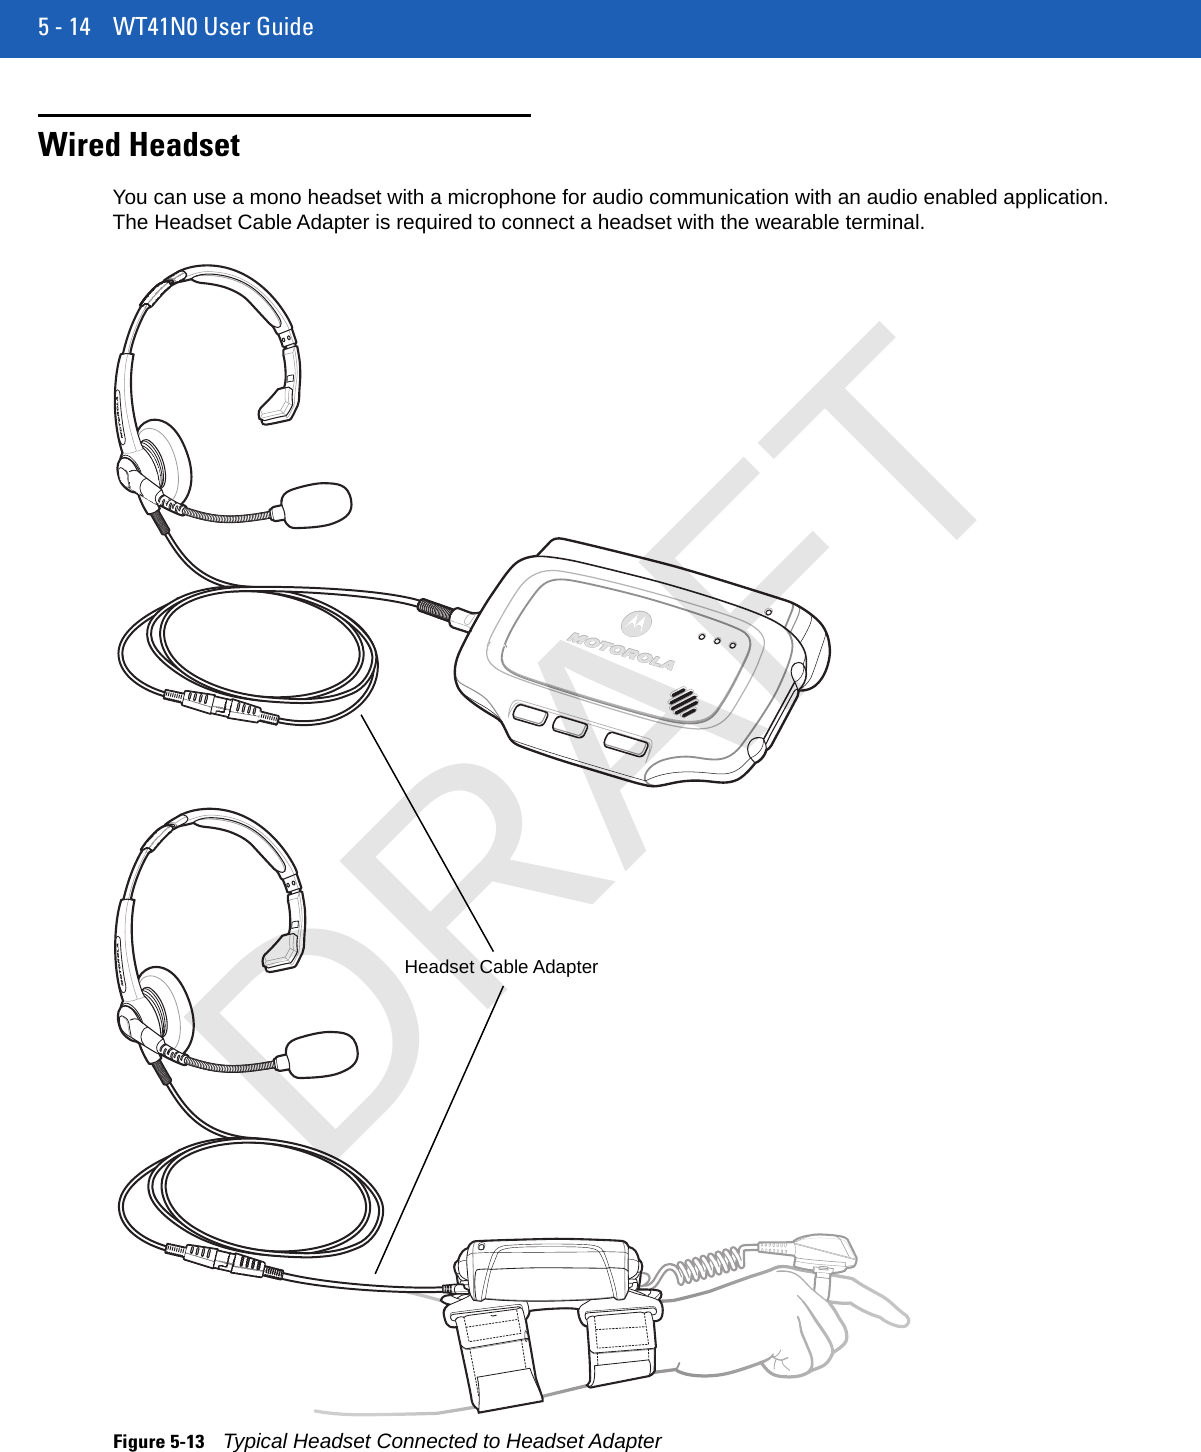 5 - 14 WT41N0 User GuideWired HeadsetYou can use a mono headset with a microphone for audio communication with an audio enabled application. The Headset Cable Adapter is required to connect a headset with the wearable terminal.Figure 5-13Typical Headset Connected to Headset AdapterHeadset Cable AdapterDRAFT